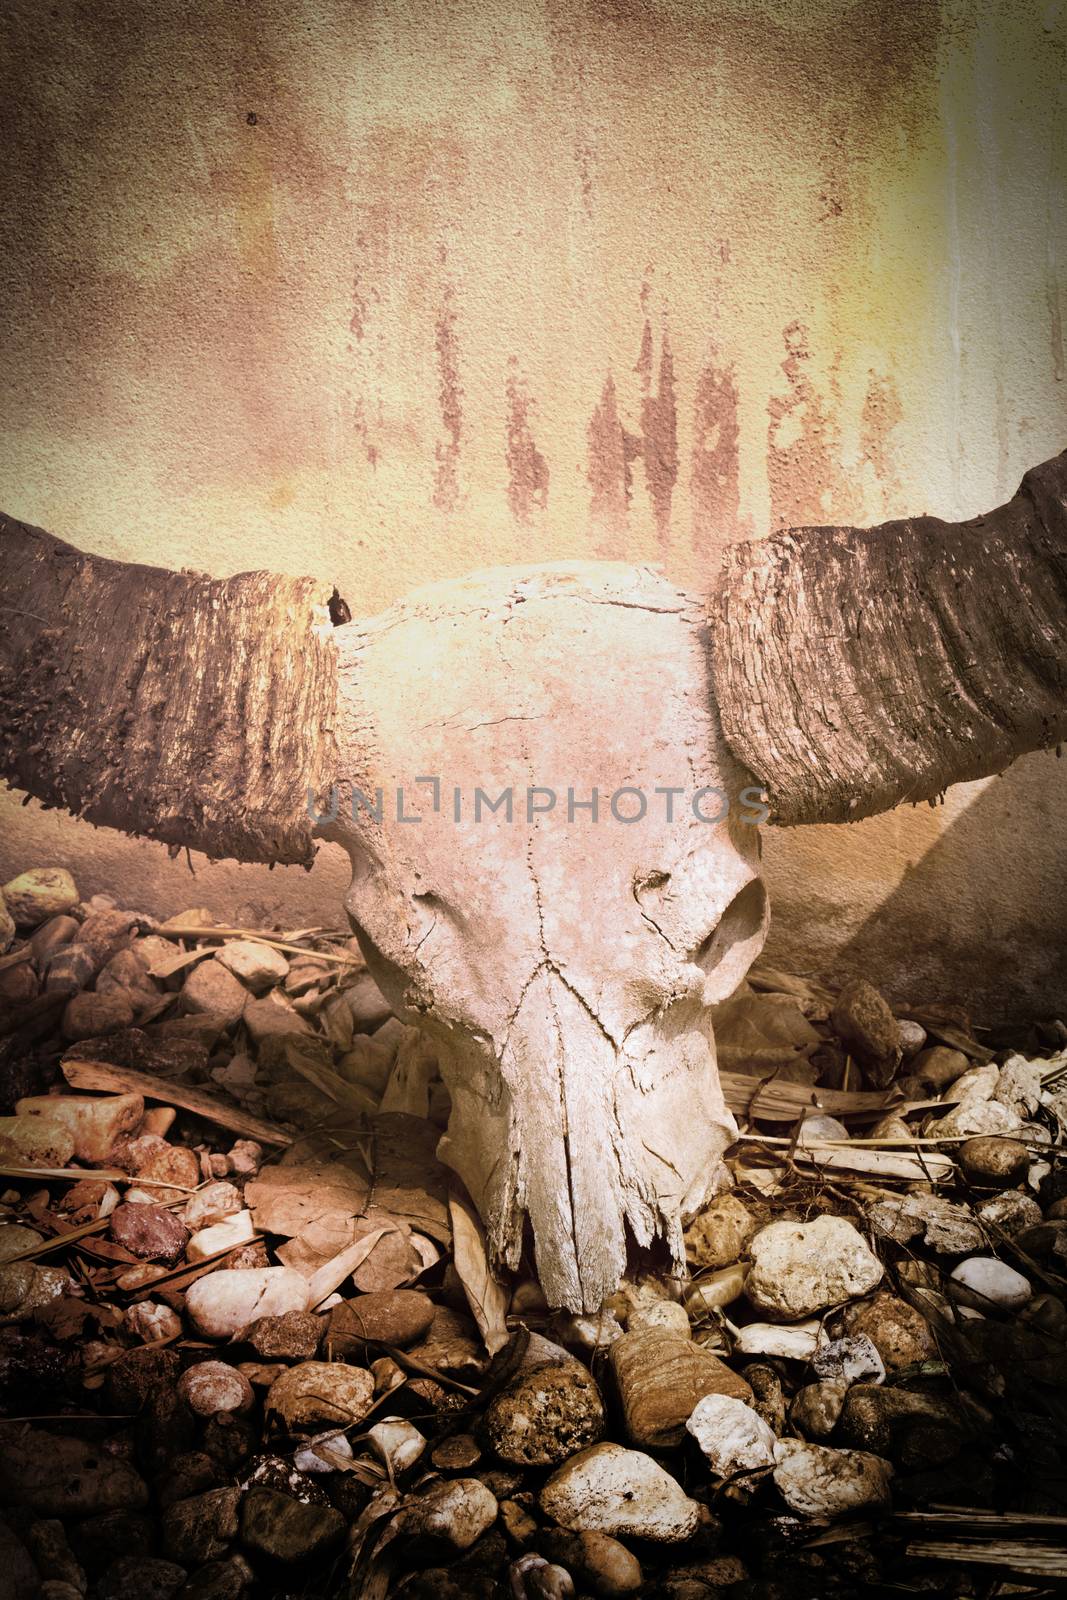 buffalo skull vintage style picture sepia color by chingraph